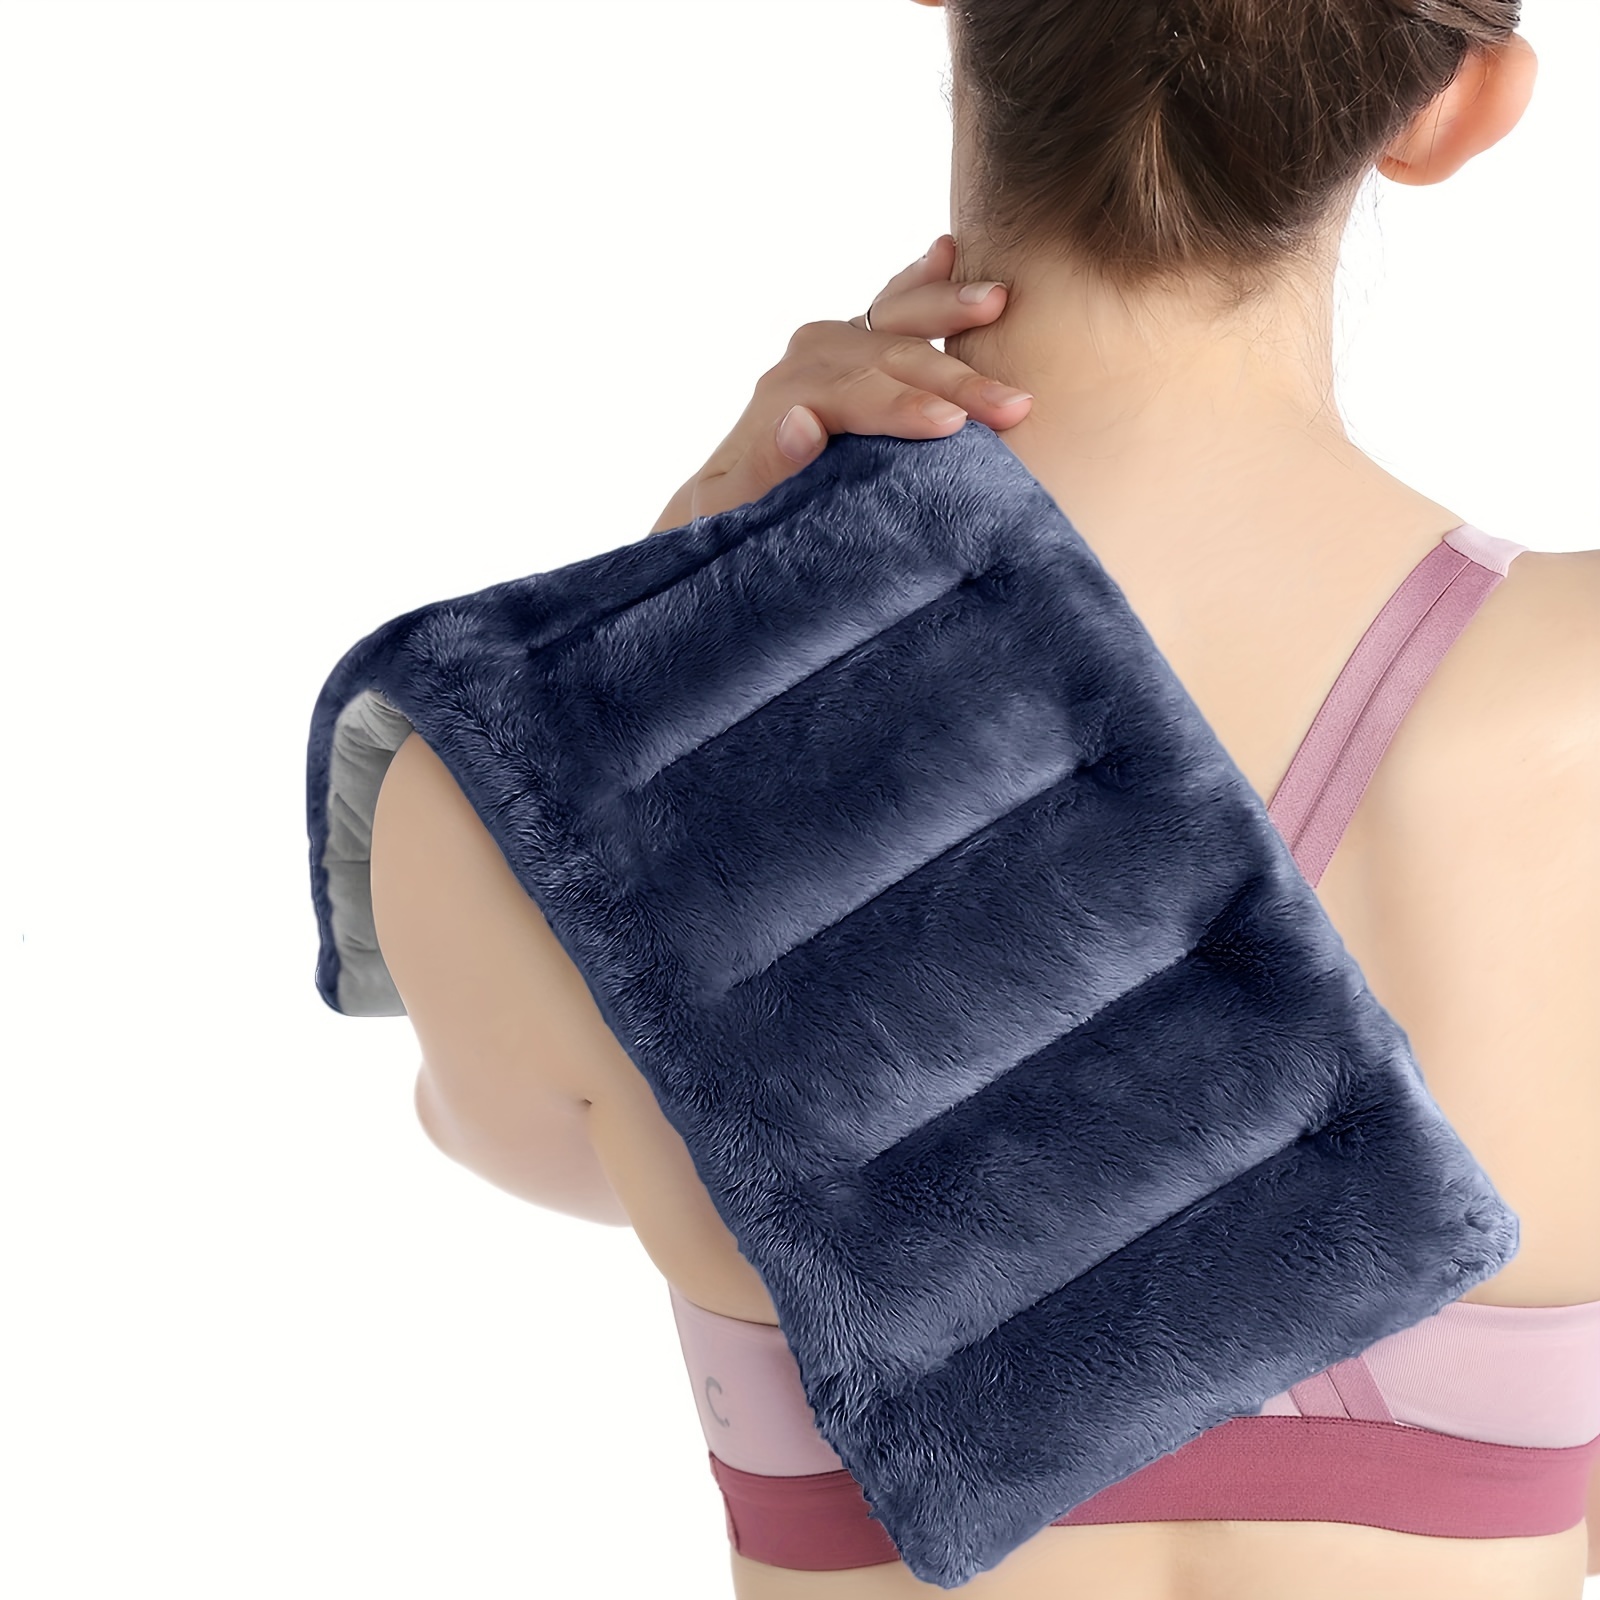 Microwave Heating Pad for Neck and Shoulders, Microwave Neck Wrap Lavender  Warm Compress for Pain Relief, Muscle Tension Relief and Relaxation - Blue